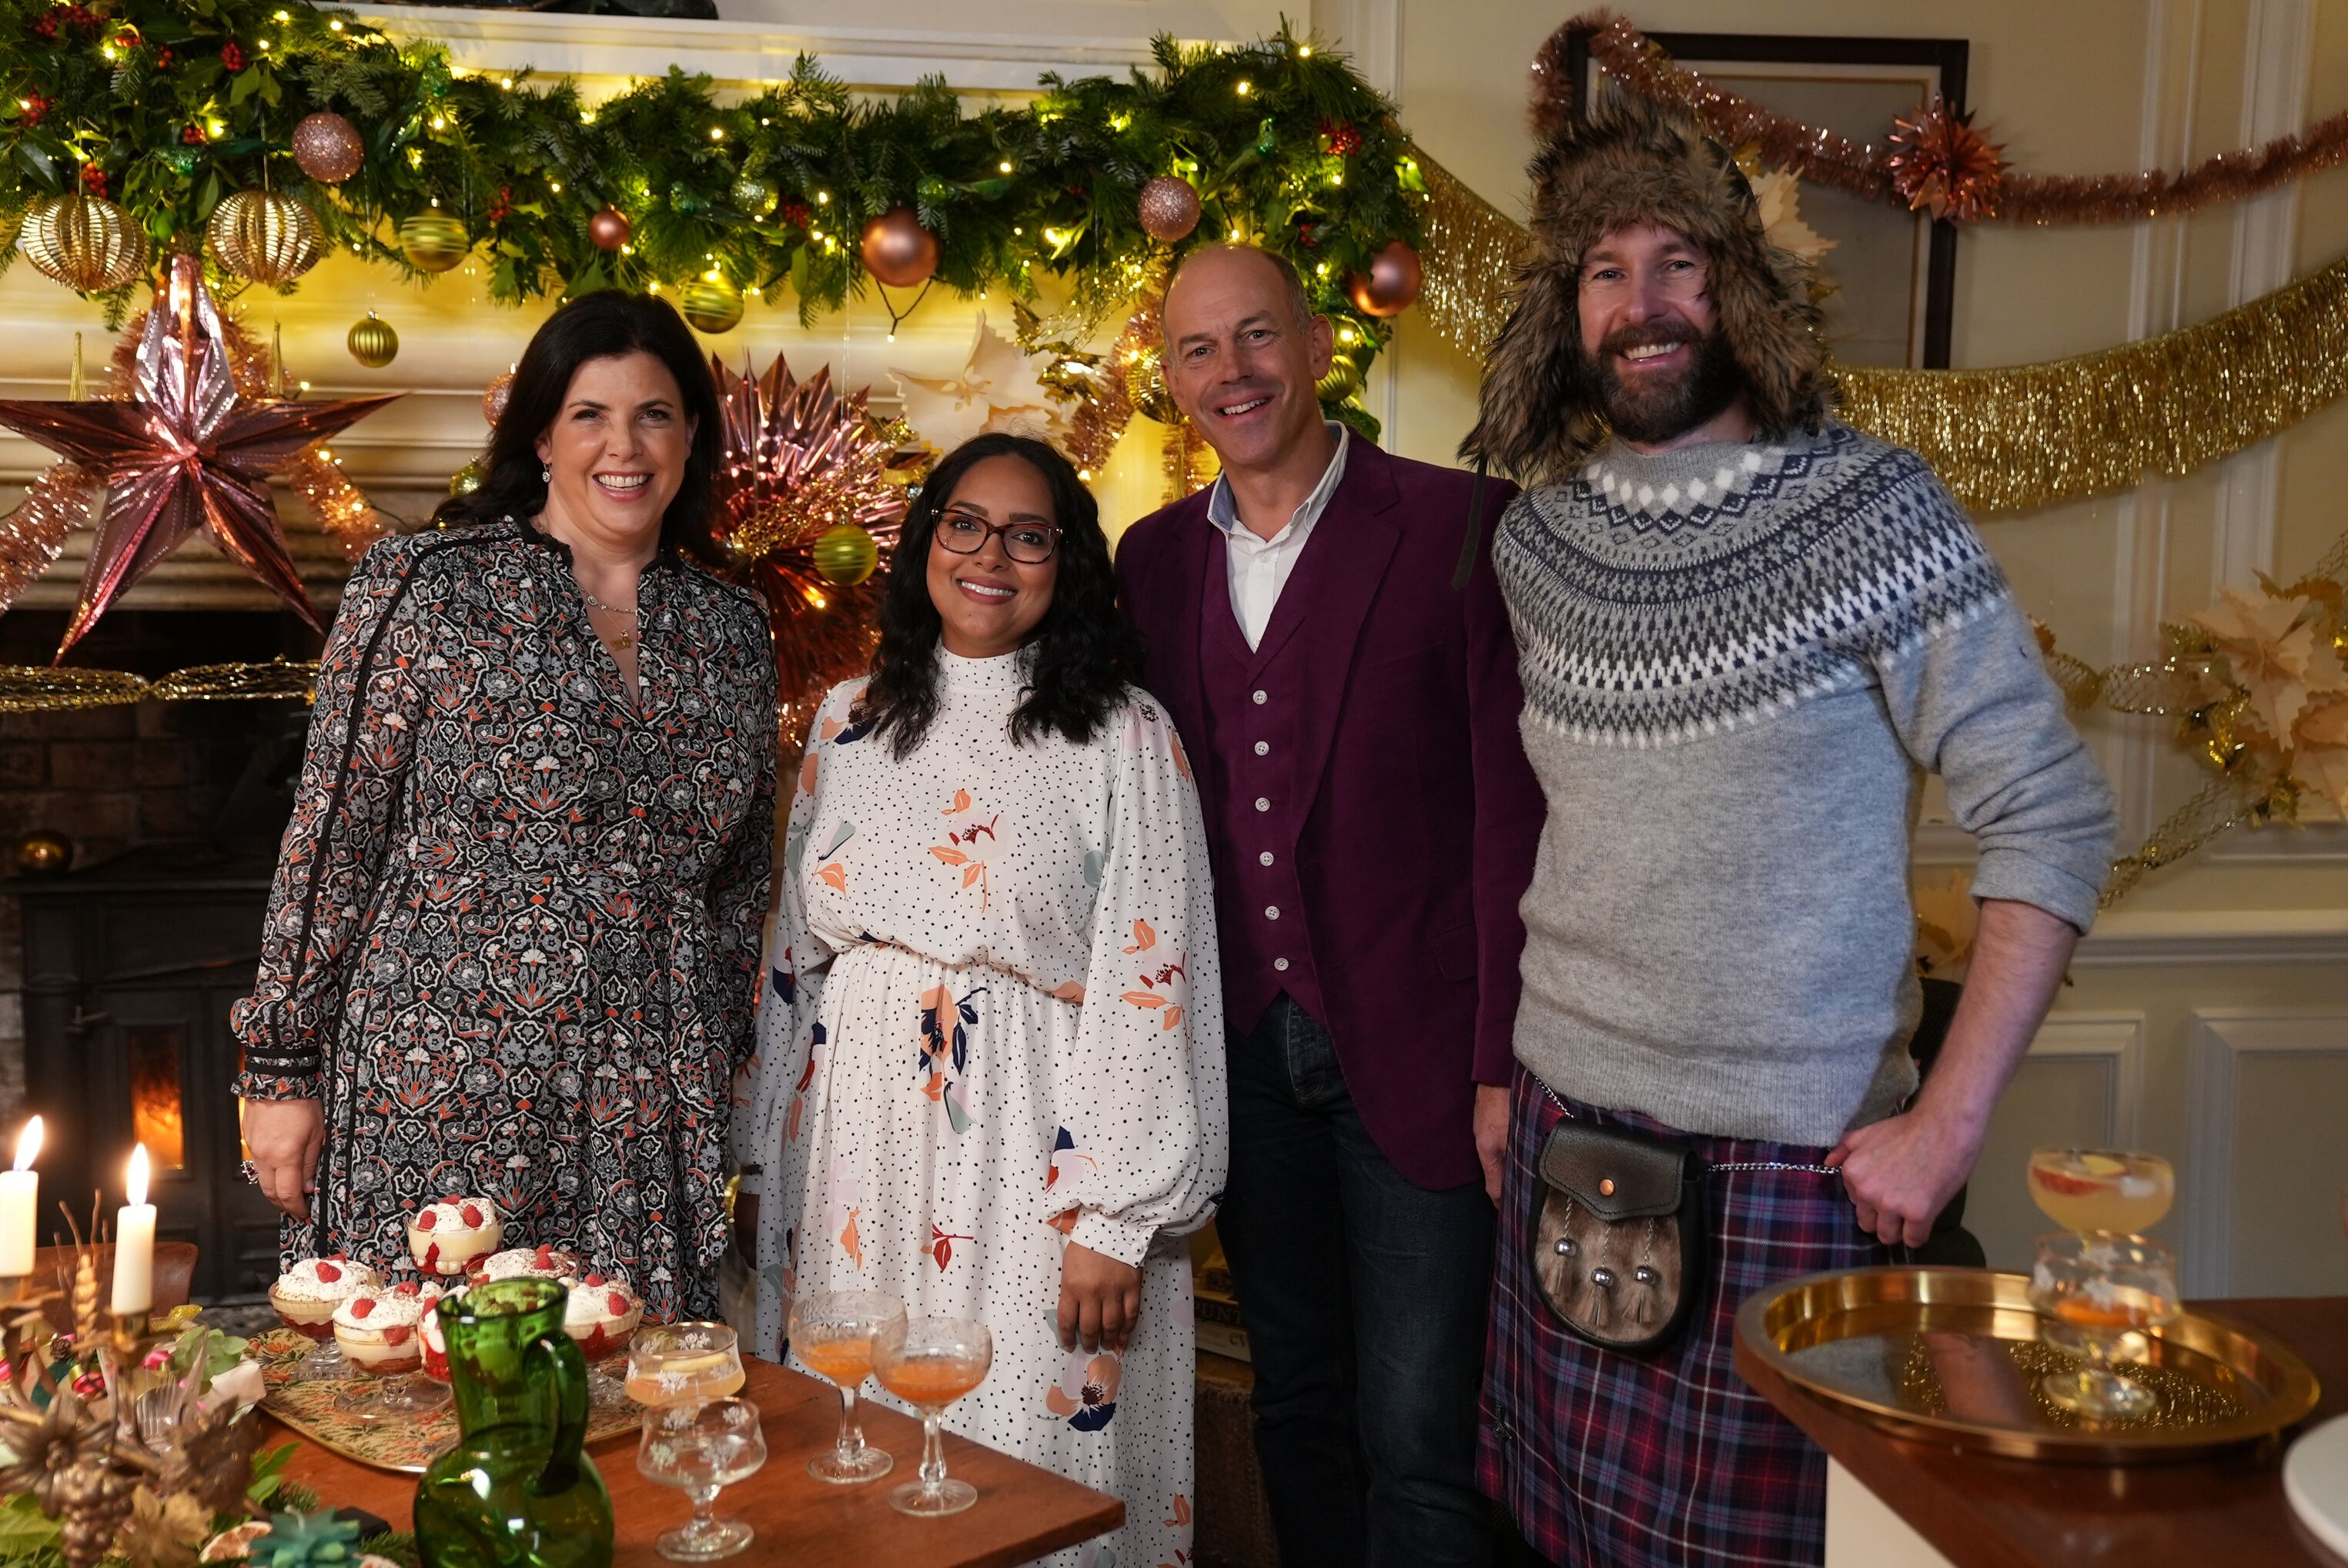 Kirstie Allsopp is joined by Shelina Permalloo, Phil Spencer and Coinneach MacLeod